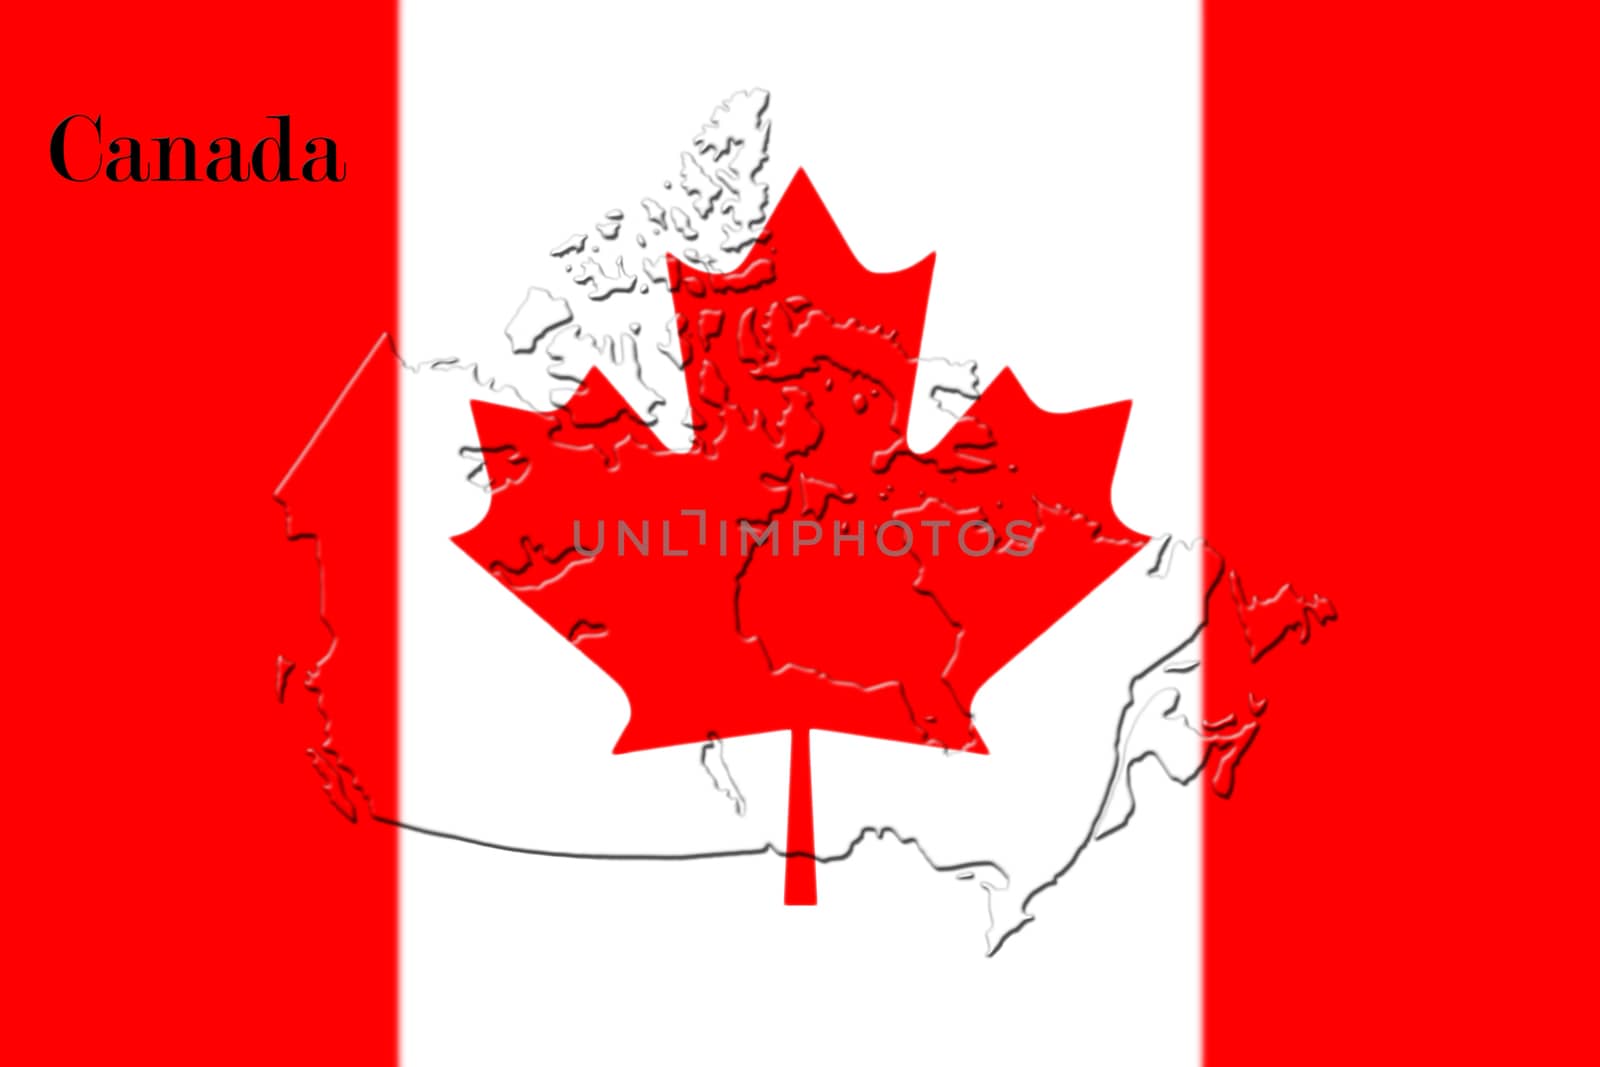 Canadian National Flag With Map Of Canada On It in Red And White Colors